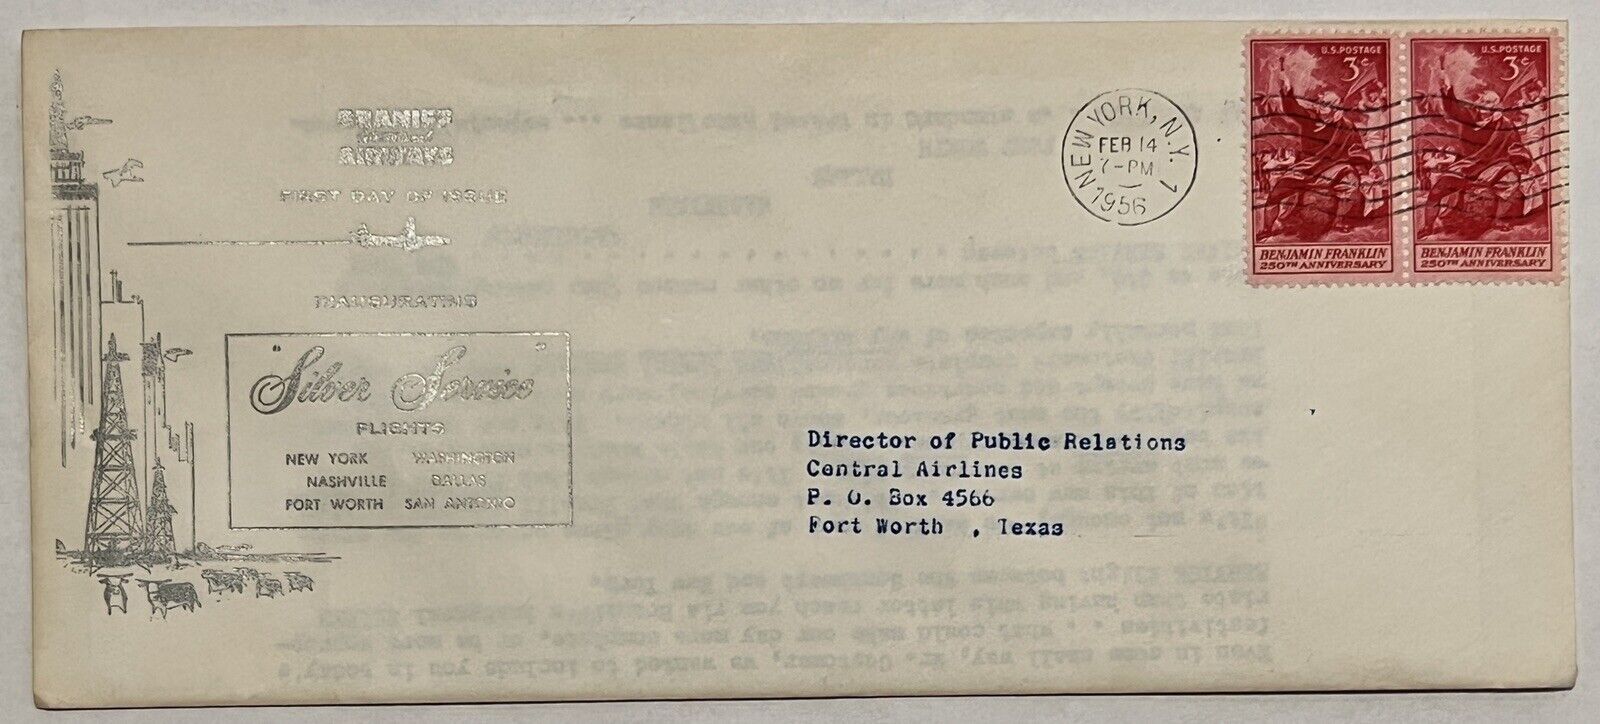 RARE 1956 BRANIFF AIRWAYS SILVER SERVICE COVER FIRST DAY OF ISSUE WITH LETTER